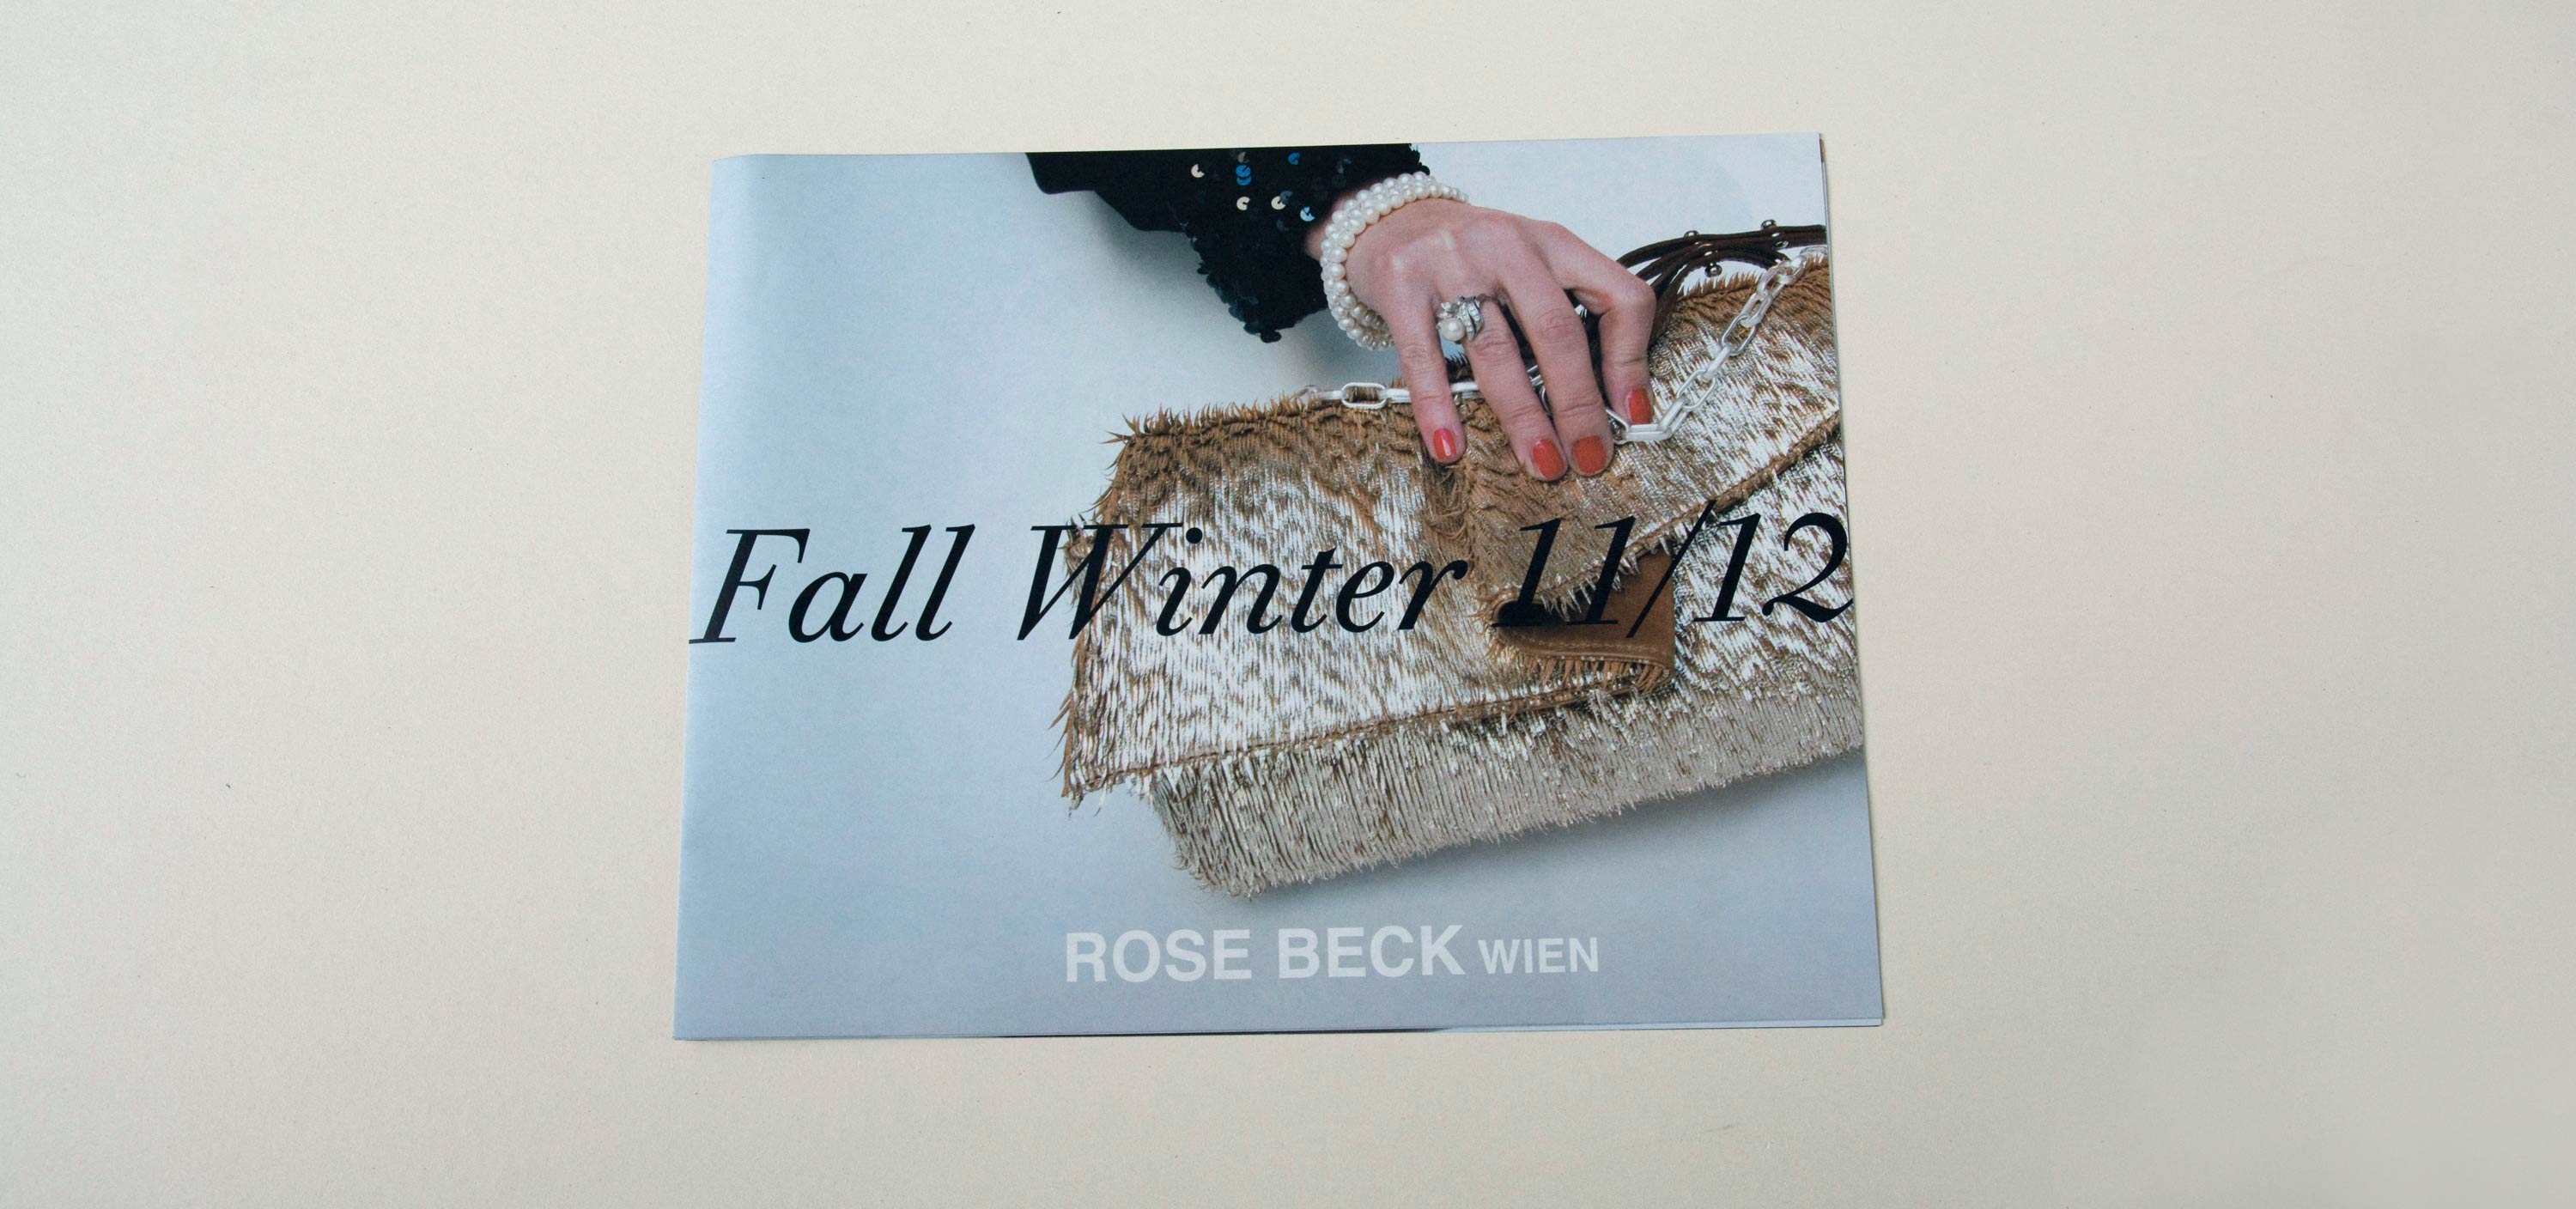 Cover catalogue. Full-page close-up photo of hand holding handbag. Large title in script font overlayed. Logo at bottom overlayed.